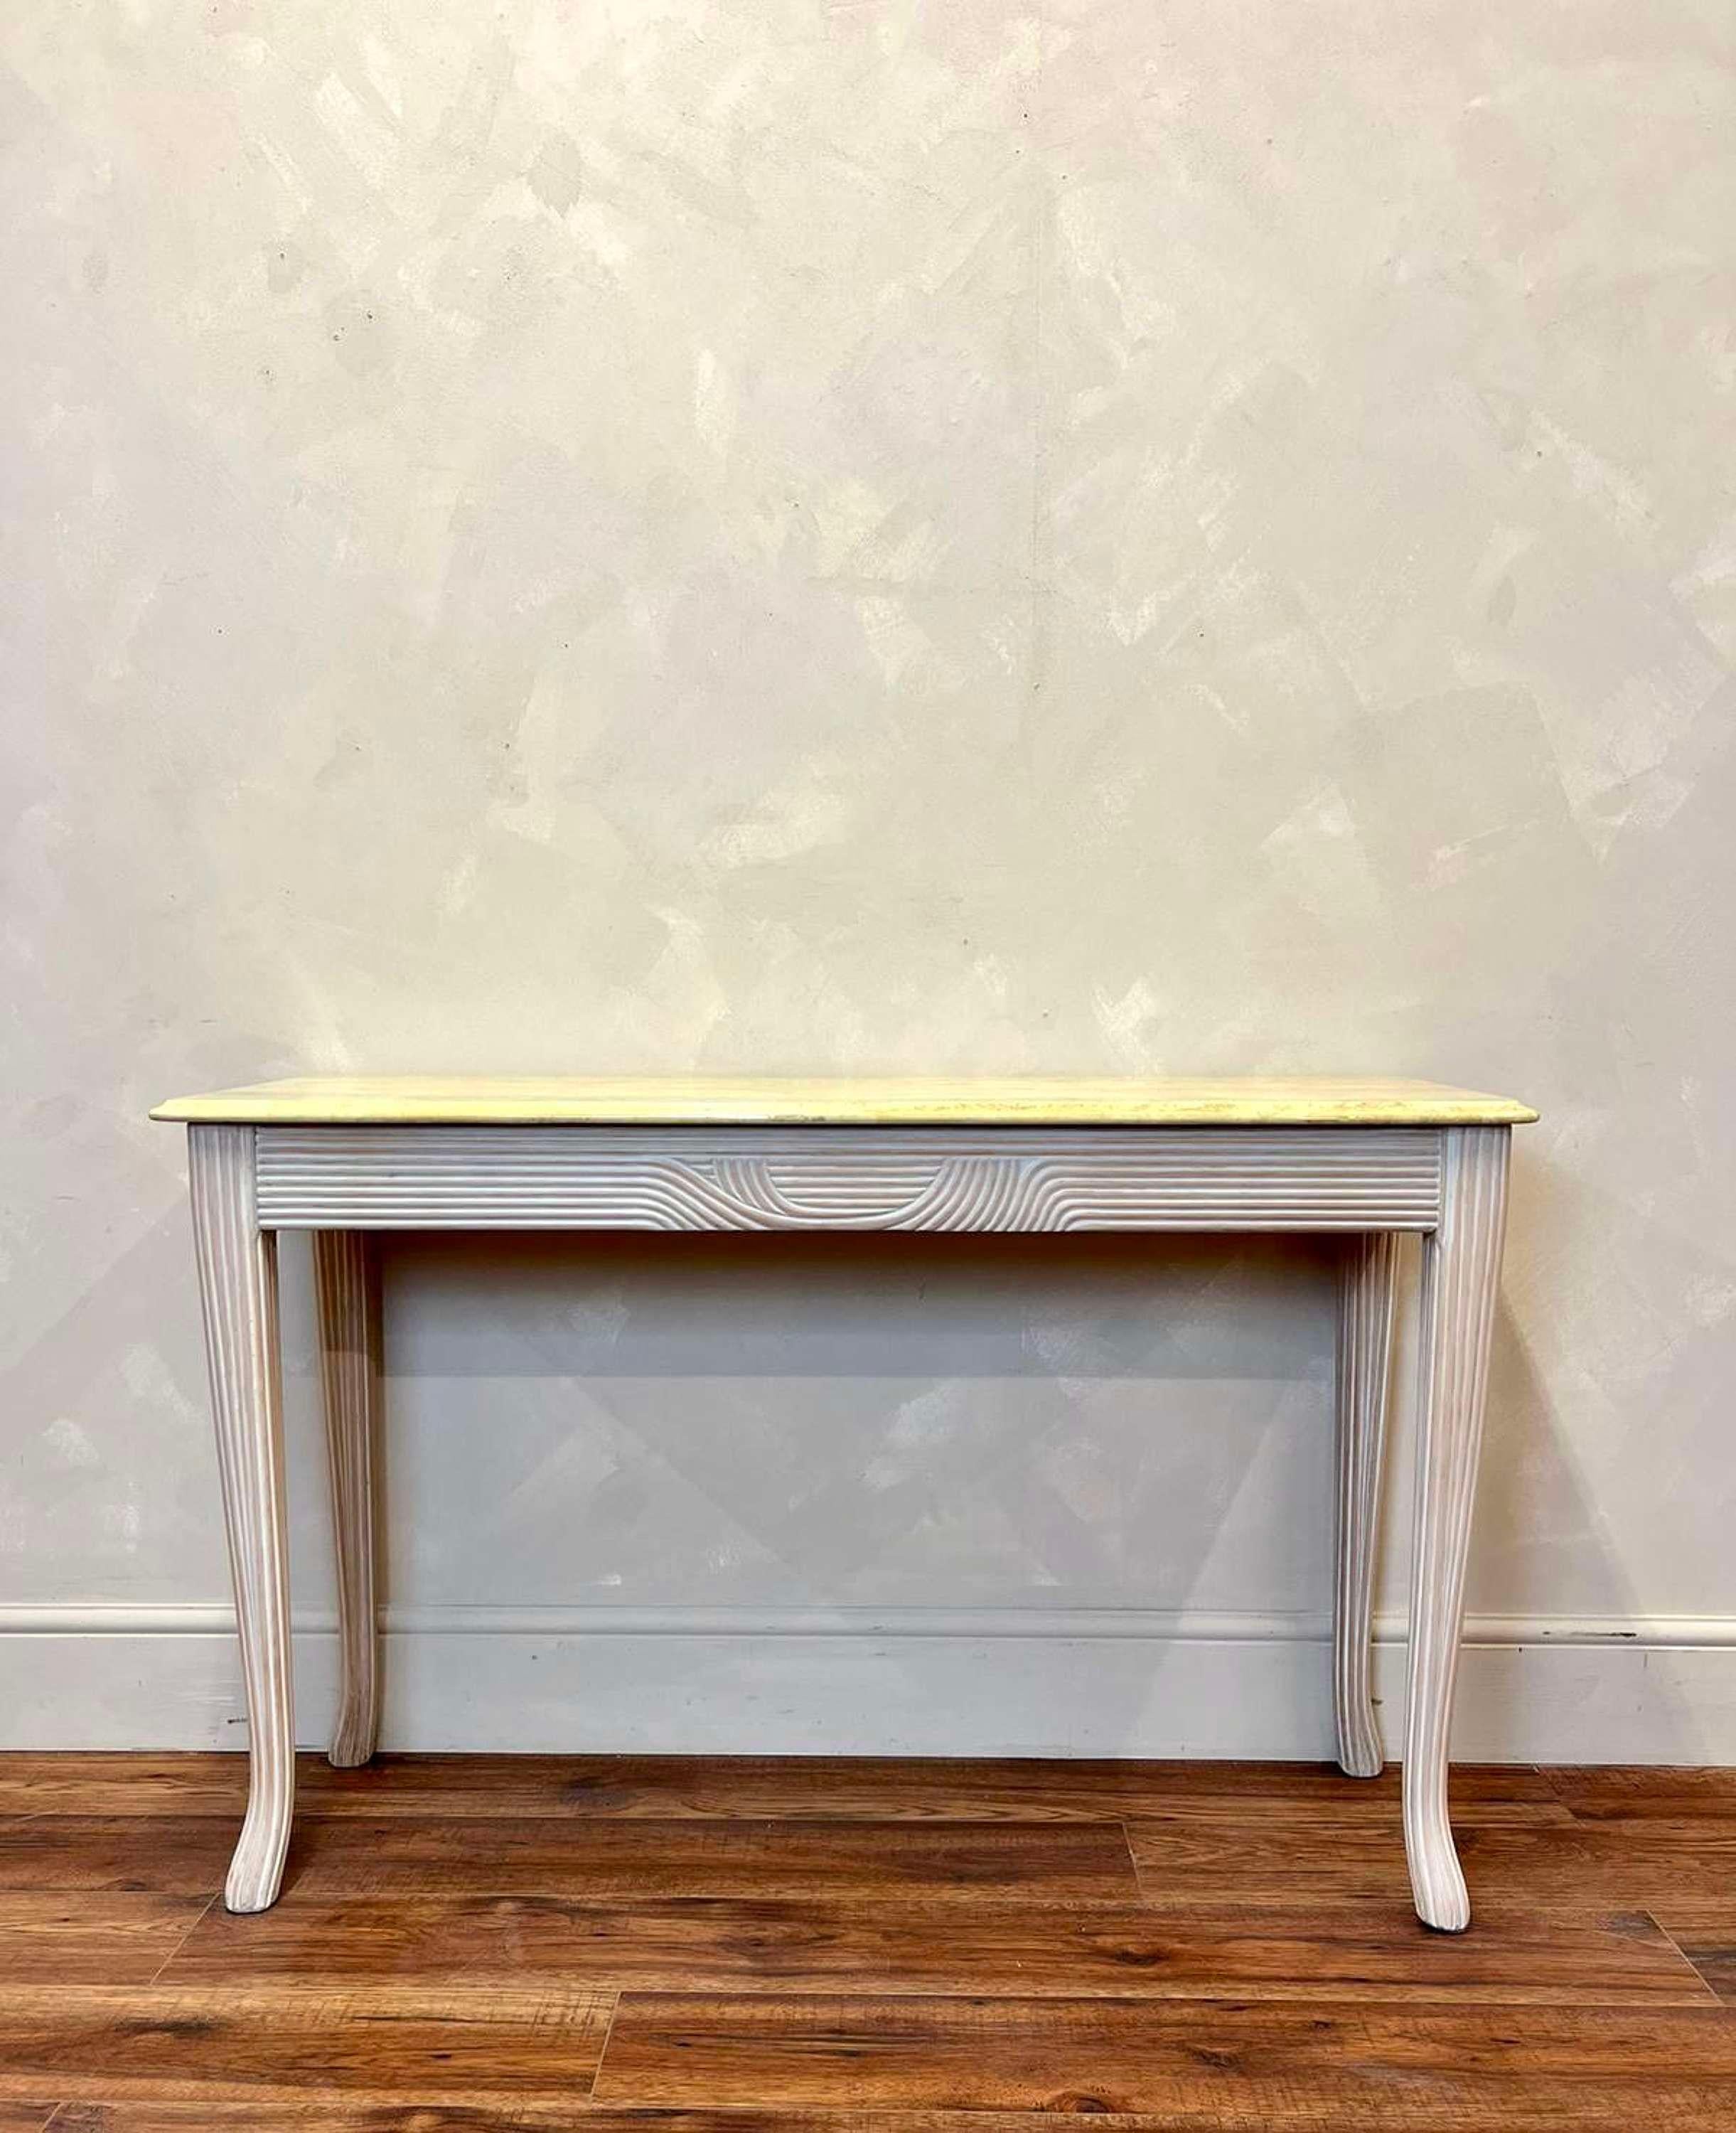 Smart midcentury Console Table in the manner of Gabriella Crespi.
Immaculate condition.
White-washed reeded legs, sit below a glazed stone top.
Dimensions:H: 78cm (30.7